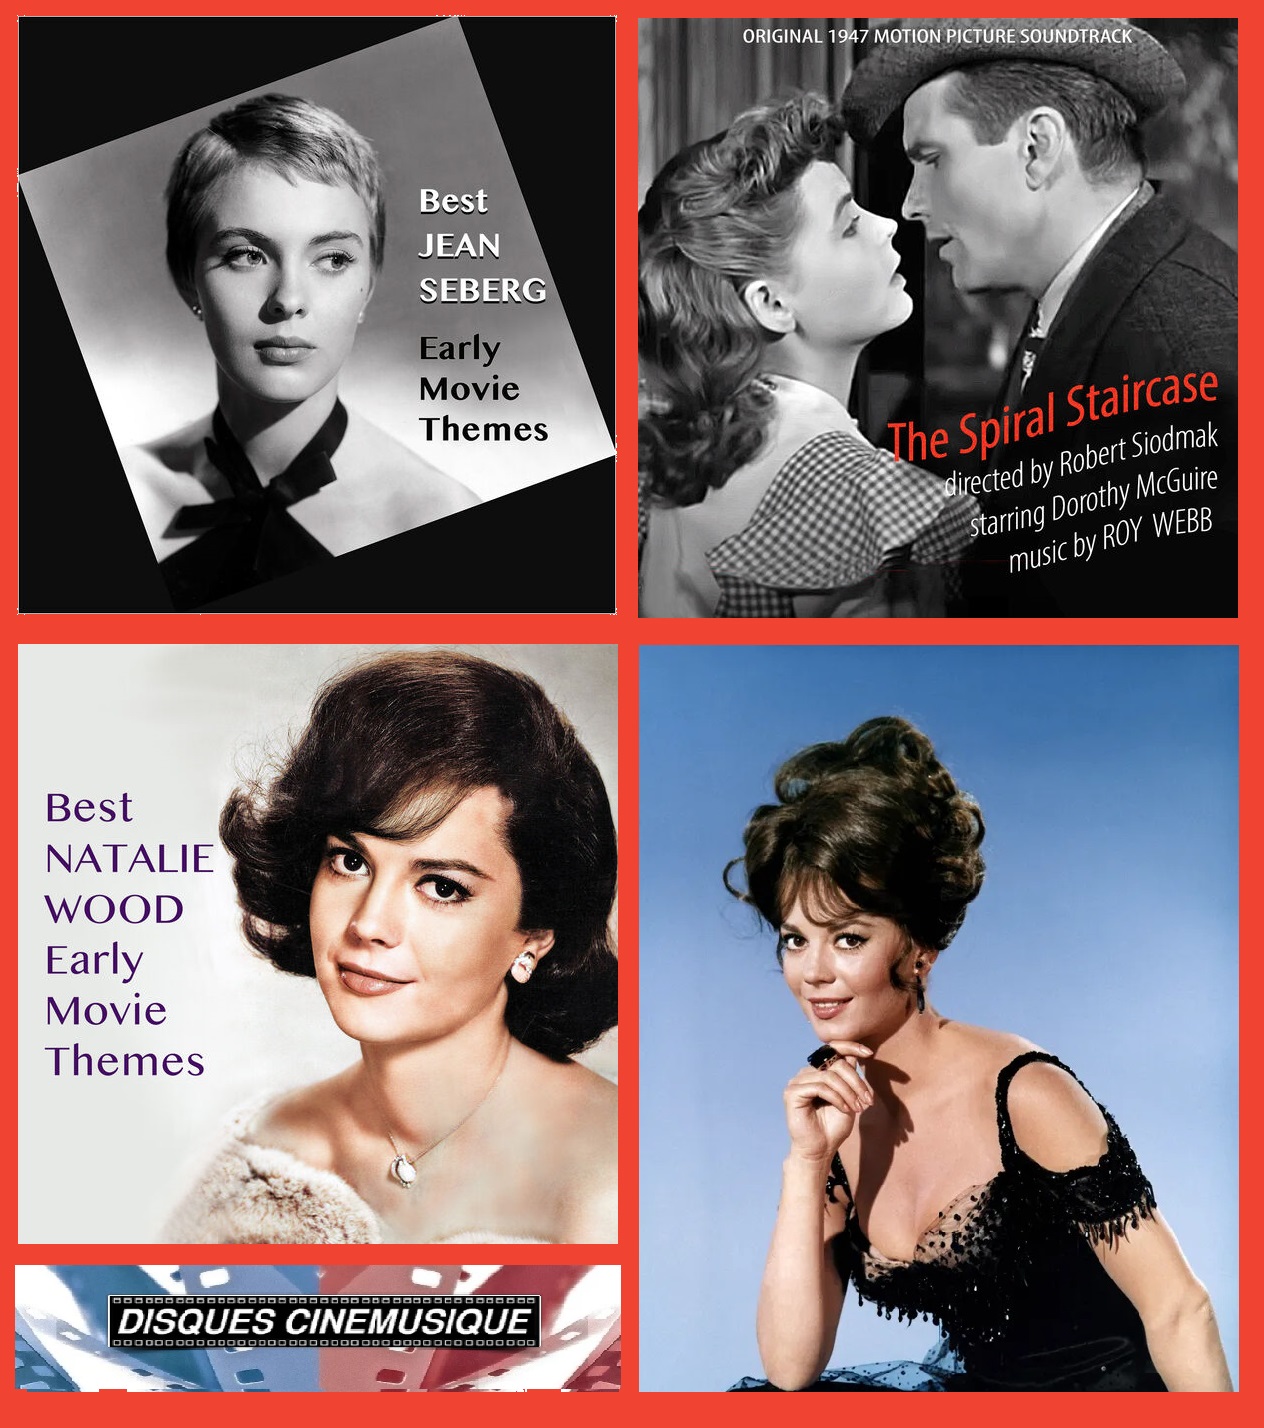 Best Jean Seberg Early Movie Themes / Best Natalie Wood Early Movie Themes / The Spiral Staircase (Original Movie Soundtrack)